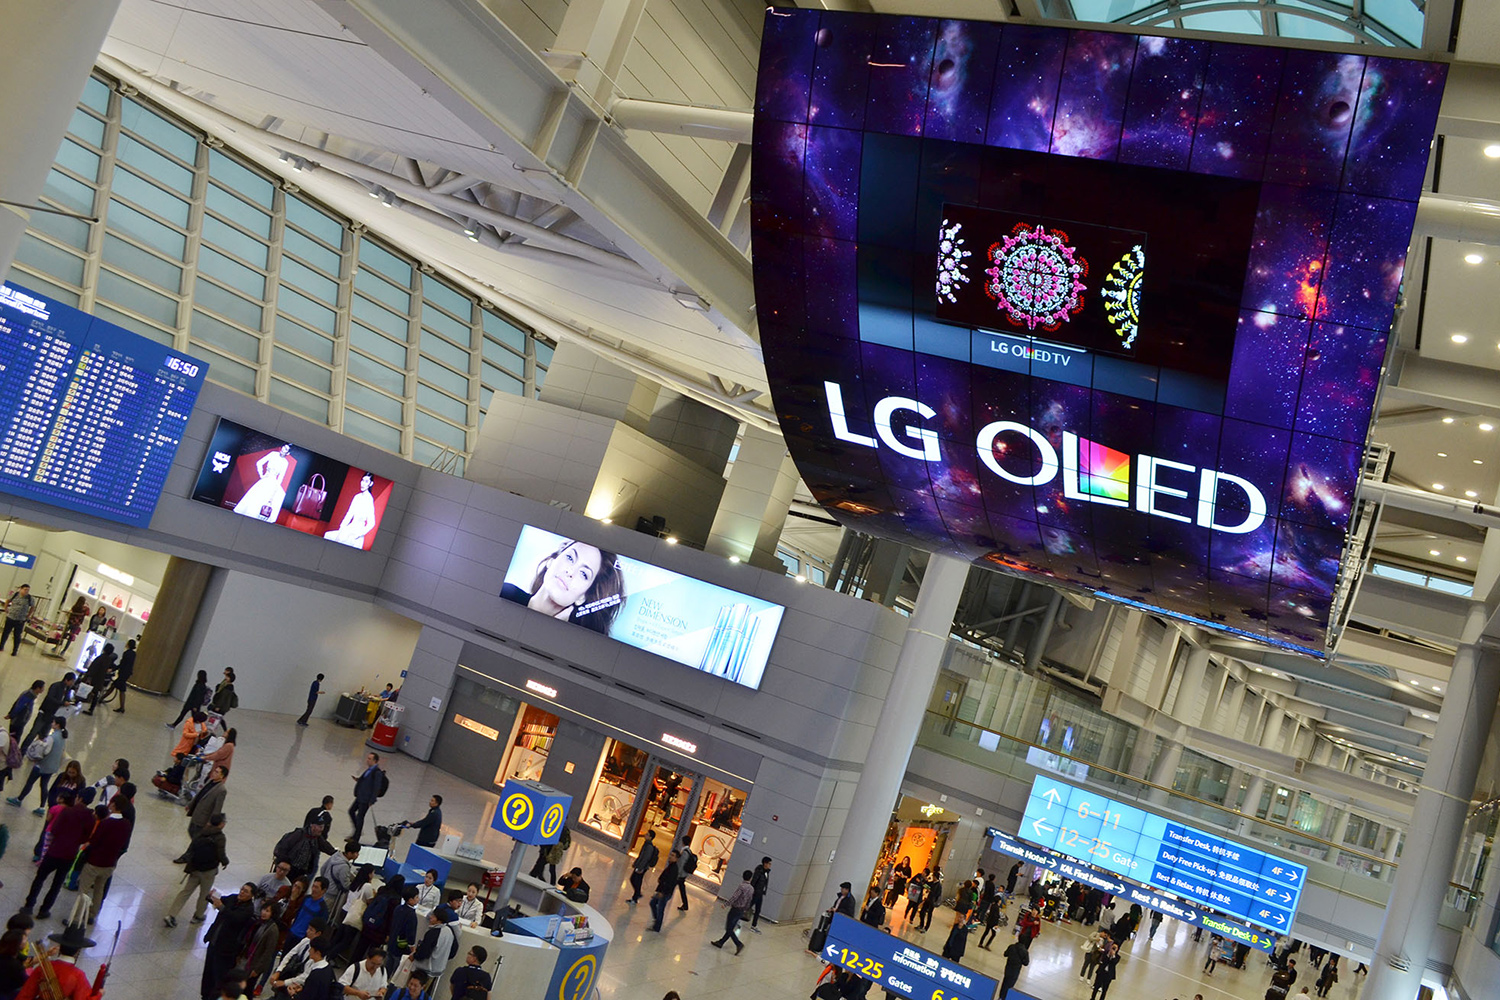 lg flexes its oled muscles with pair of 42 foot tall monster displays display 1